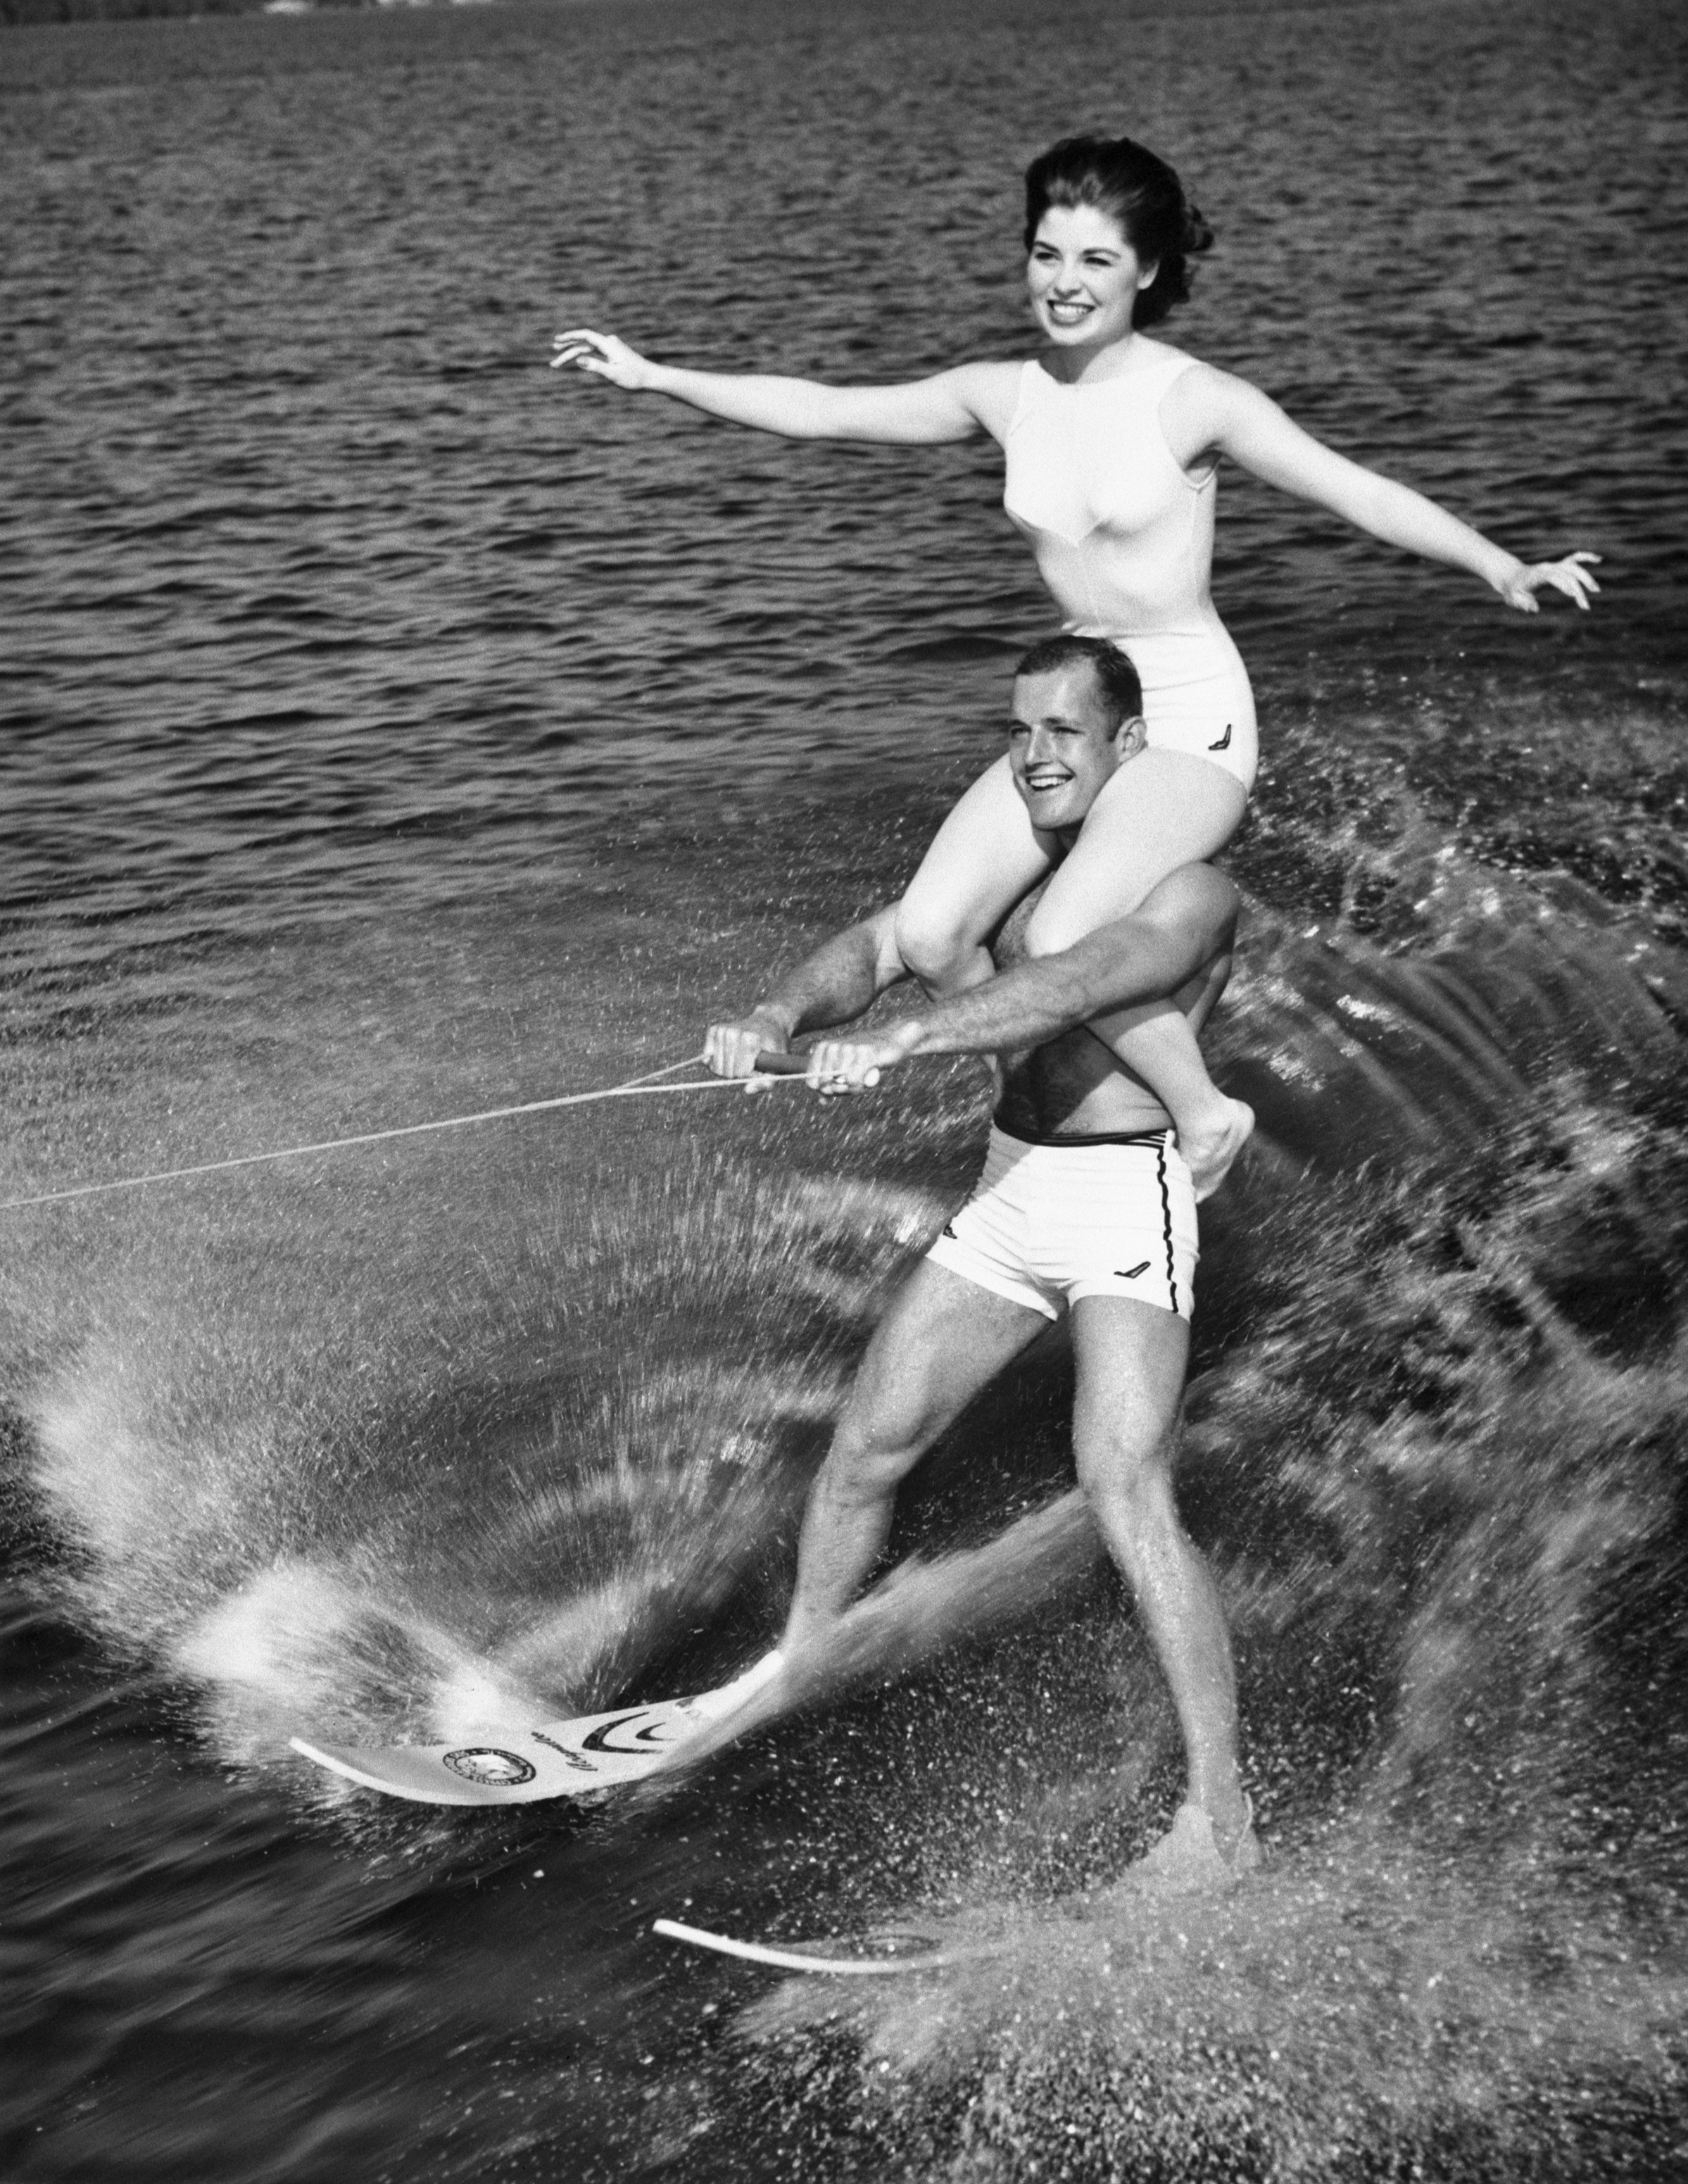 Couple Performing Water Skiing Act